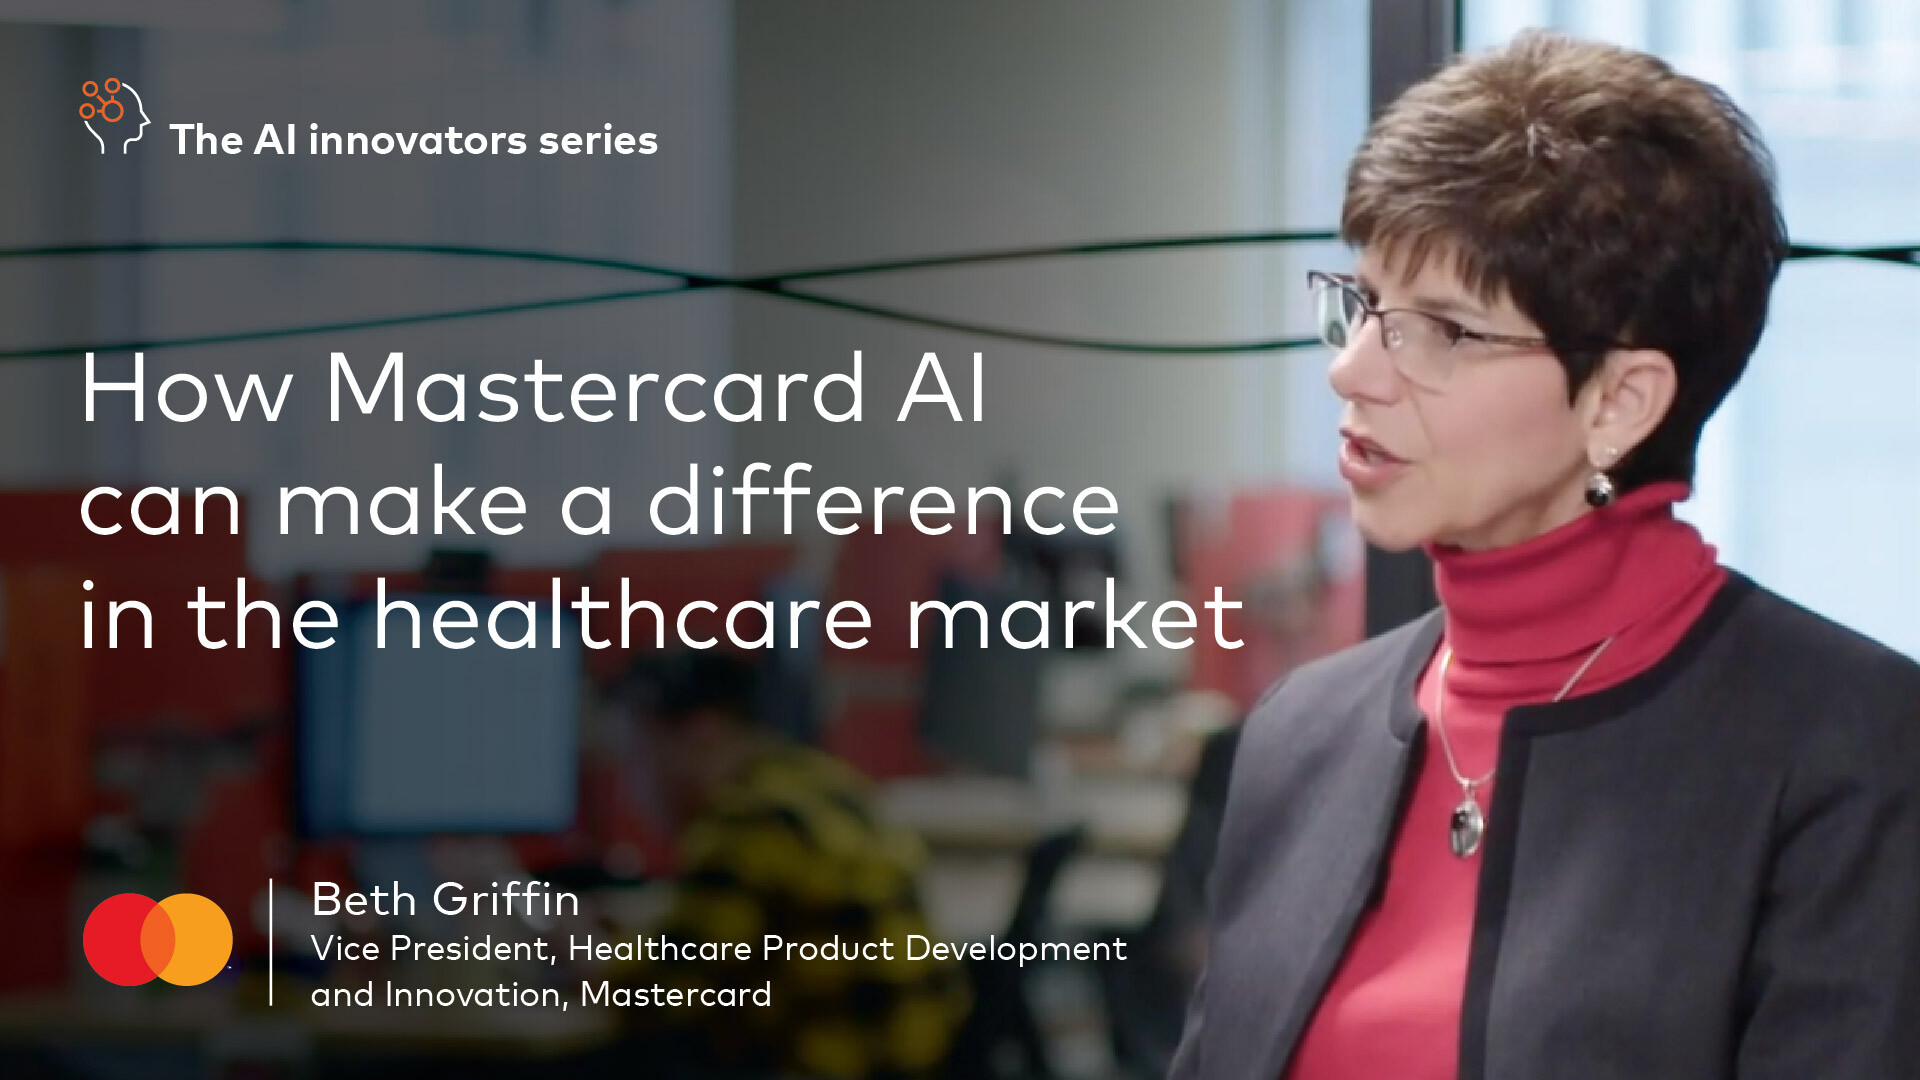 How Mastercard AI can make a difference in the healthcare market